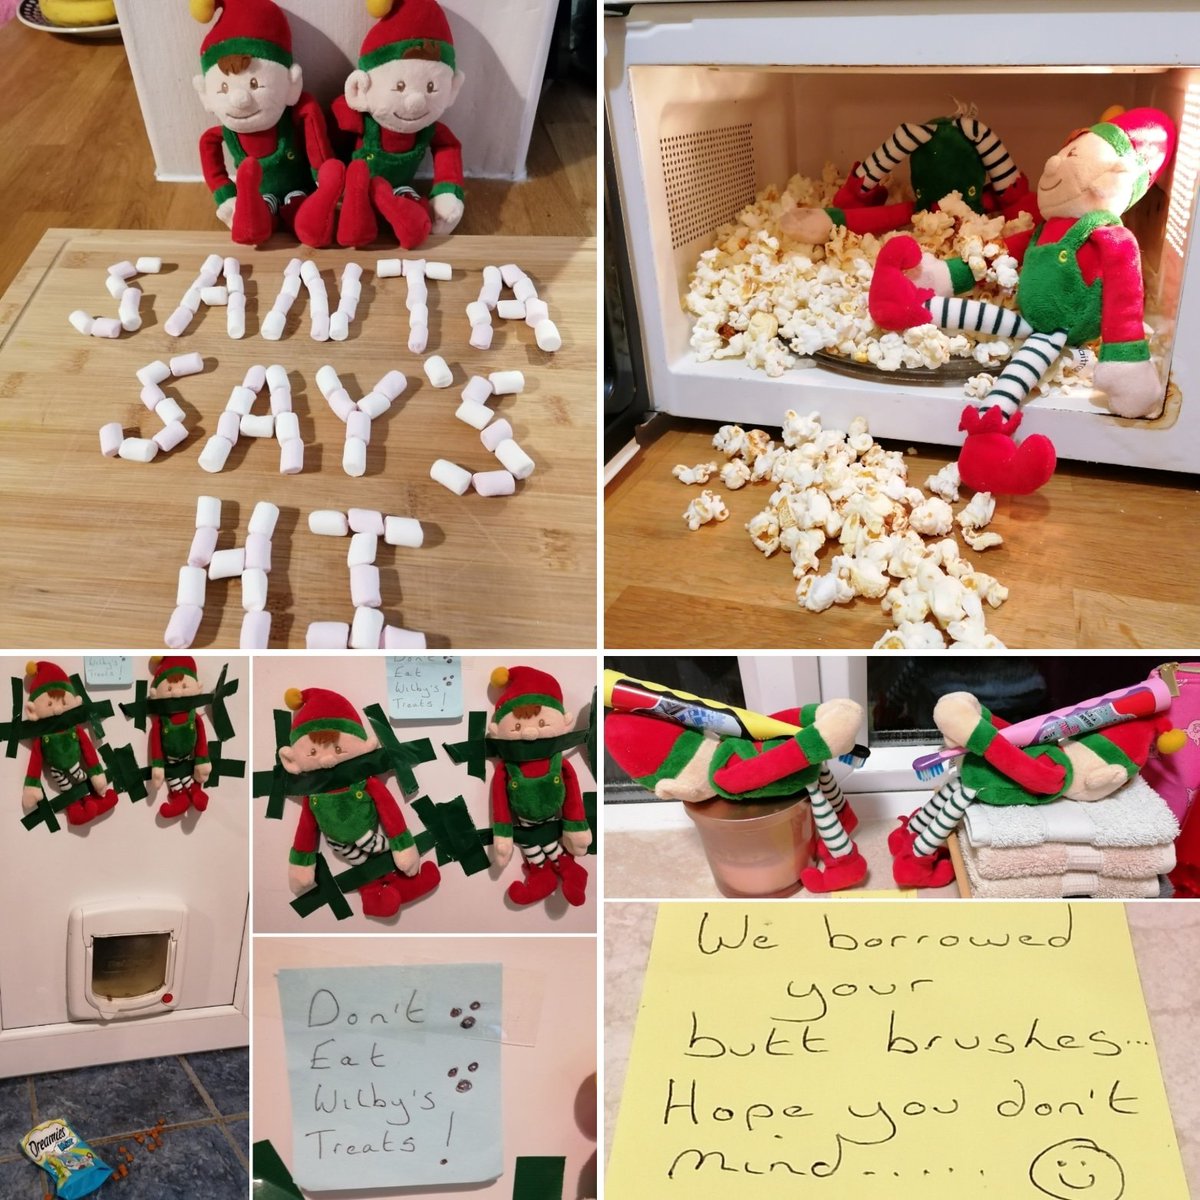 Uh oh - those cheeky elves are up to no good! They've been having popcorn parties, using Alf's & Boo's toothbrushes to clean their bums plus been eating Wilby's Dreamies - an absolute catastrophe!! 😂🙀🤣😭 cmls.world/those-elves/ #TroubleIsBrewing #NaughtyElves #LetsGetBusy